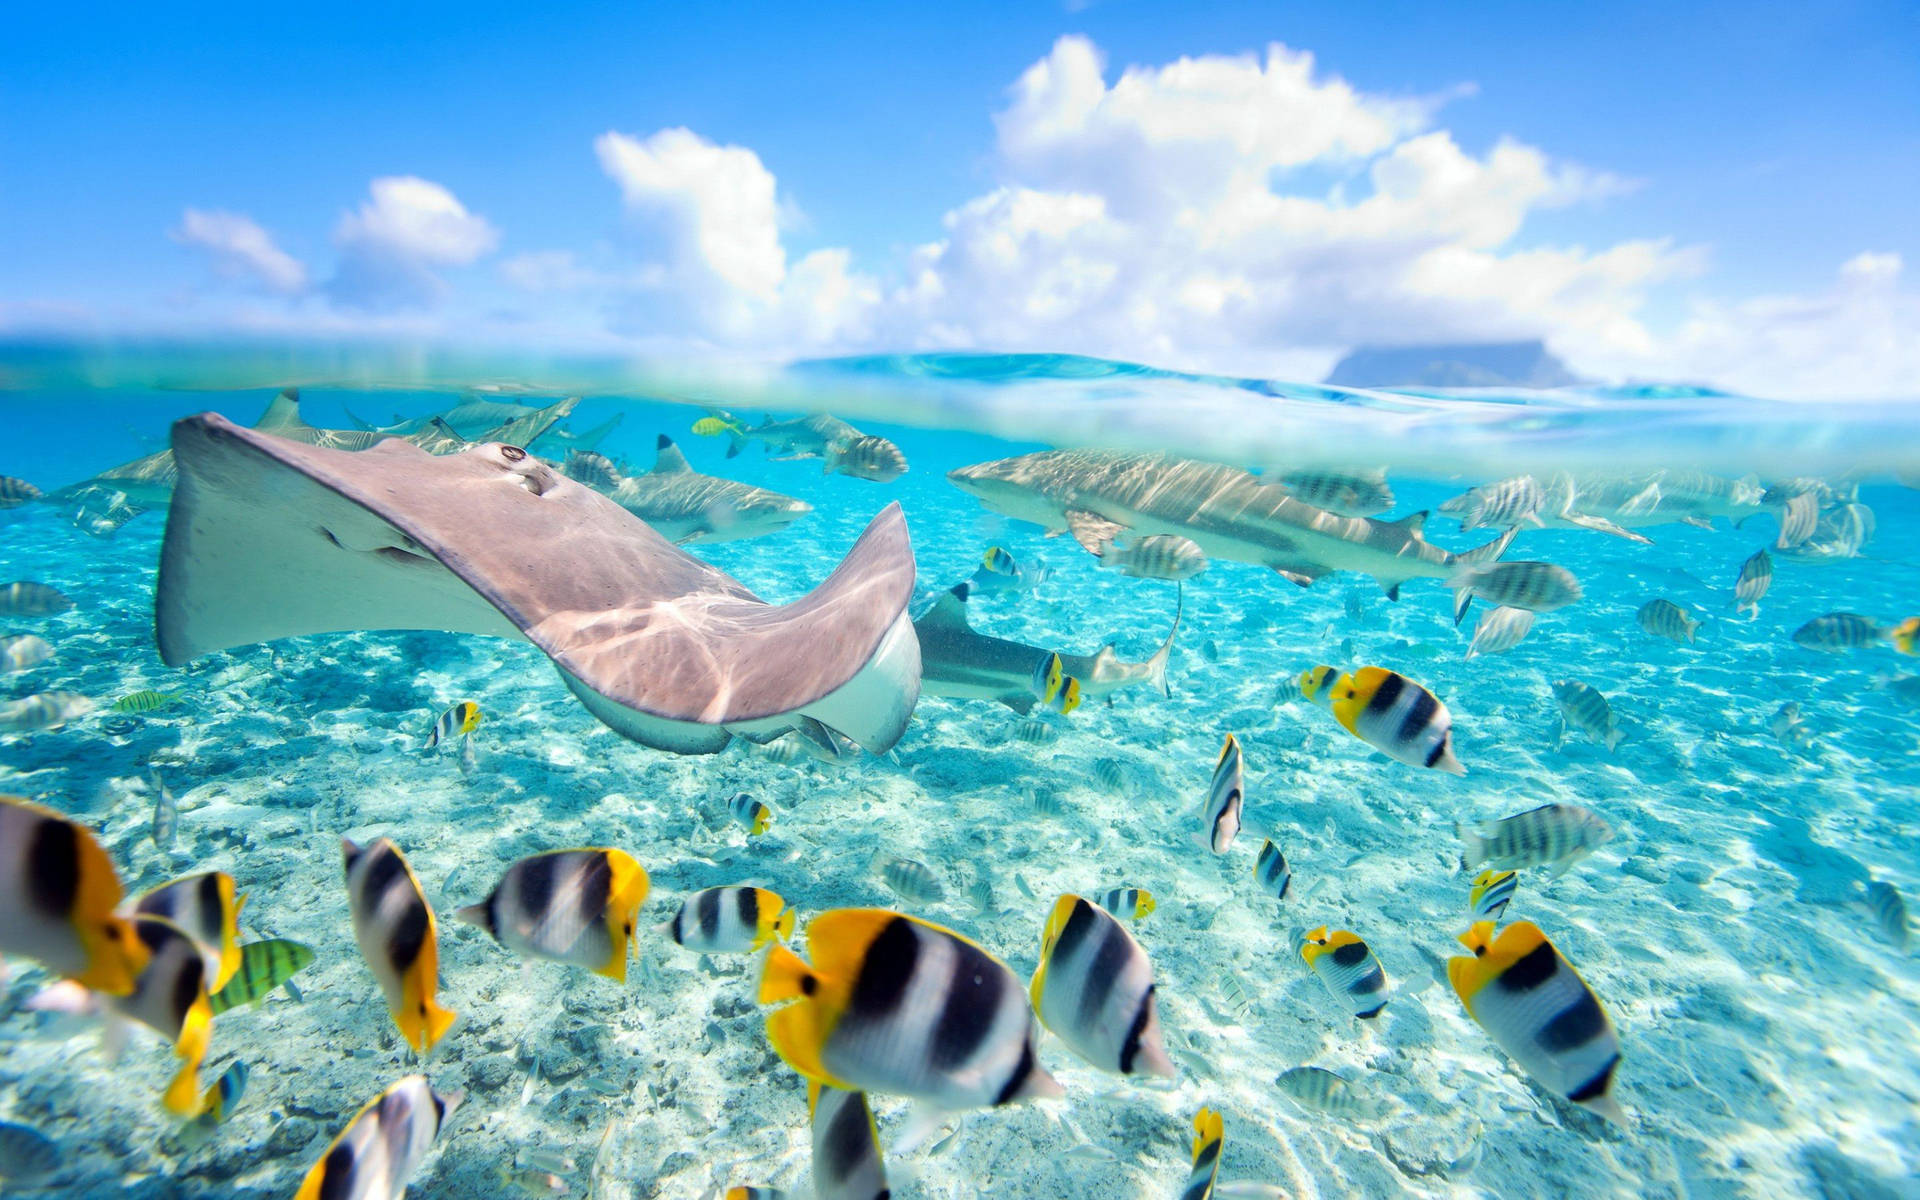 A colorful tropical fish swimming in a picturesque turquoise ocean. Wallpaper